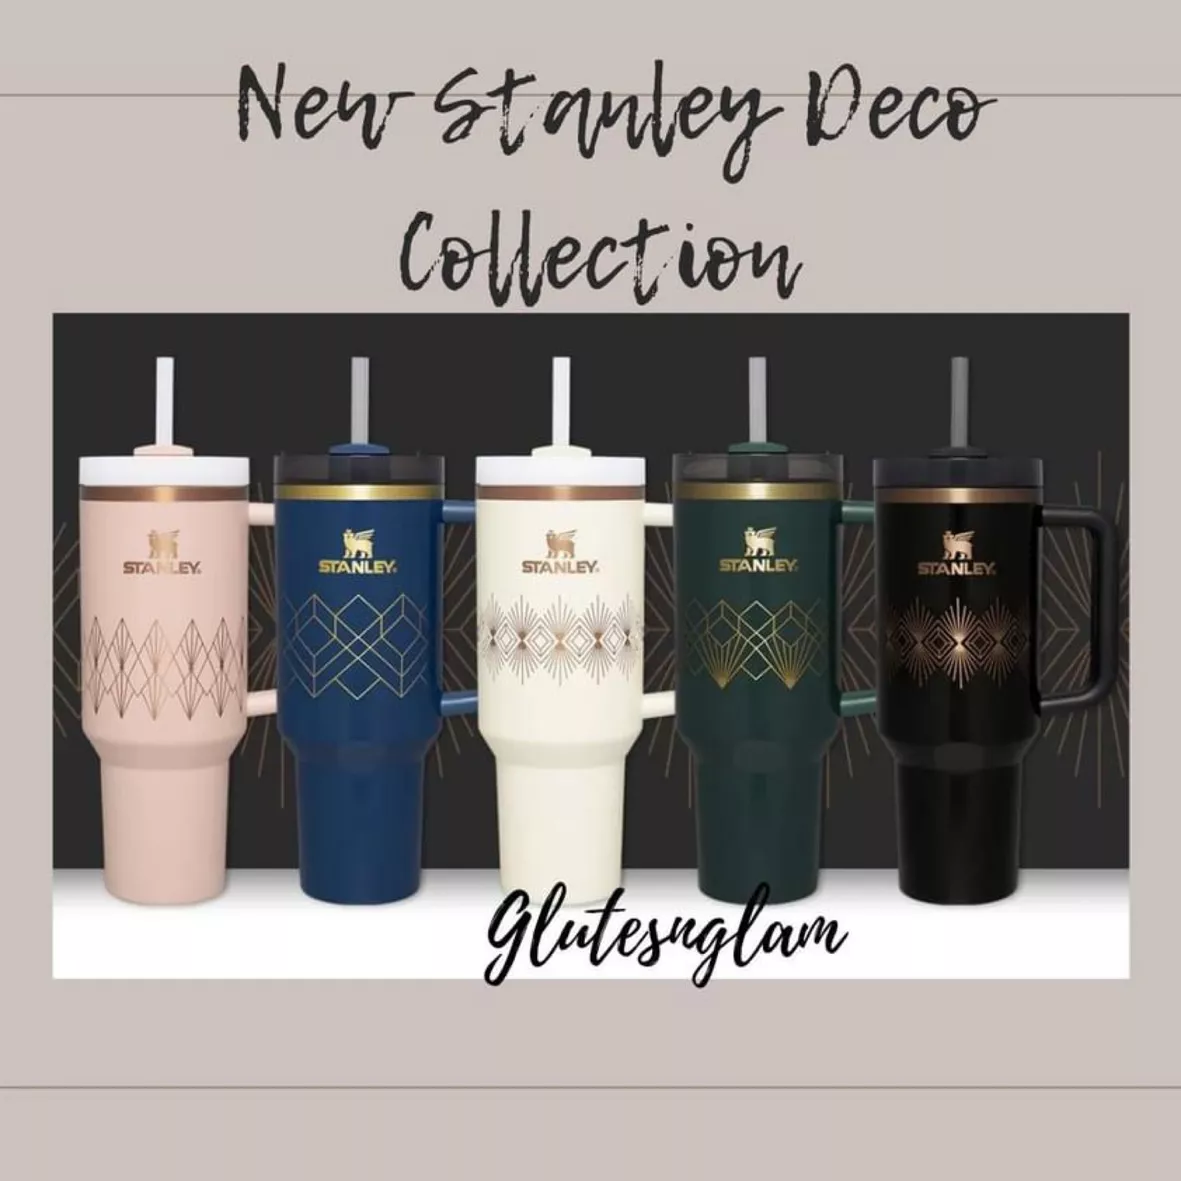 Stanley Deco Collection Quencher H2.0 FlowState Tumbler